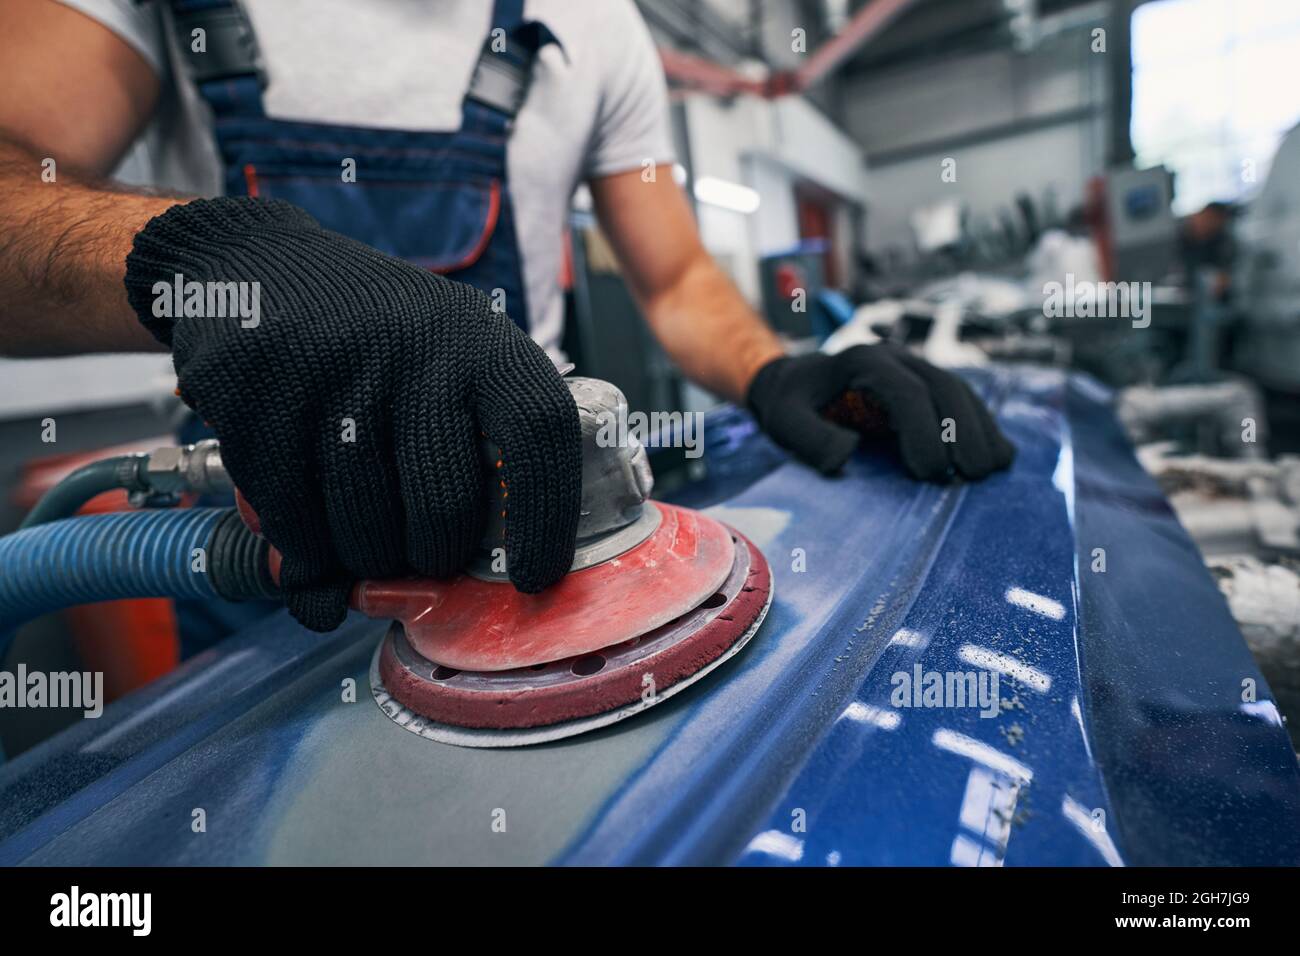 Repair shop worker sanding car with grinding machine Stock Photo